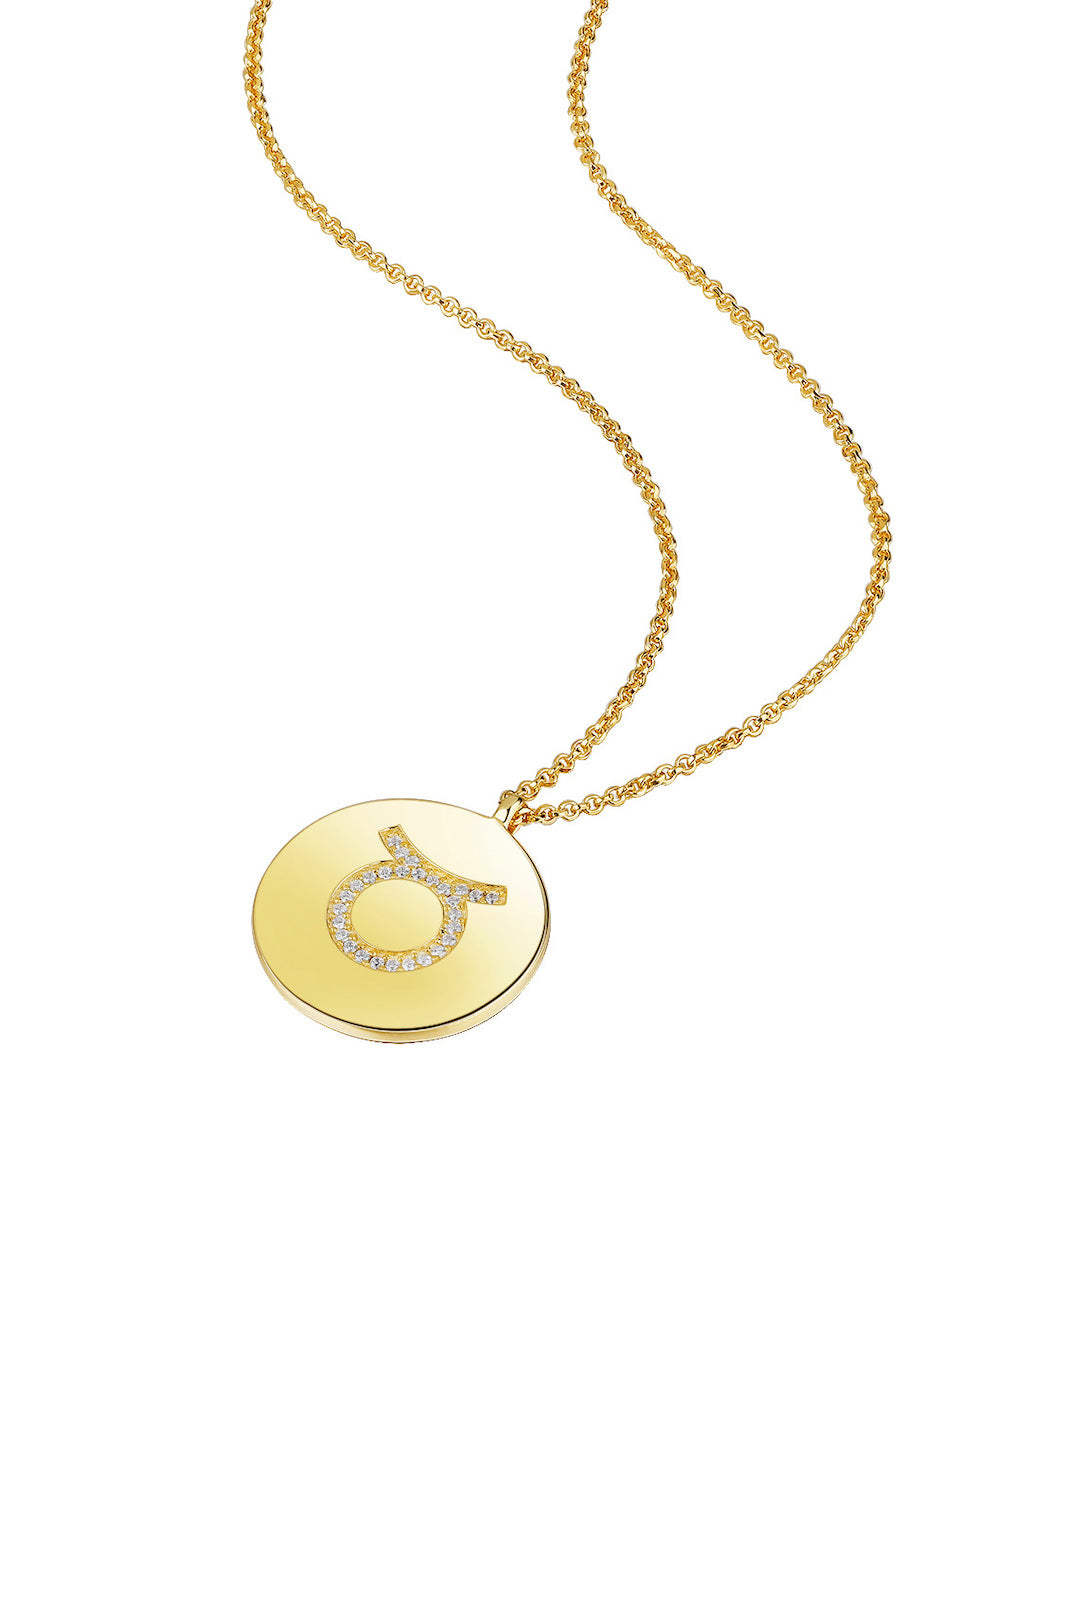 Gold Plated Silver Zodiac Necklace - Taurus Side View